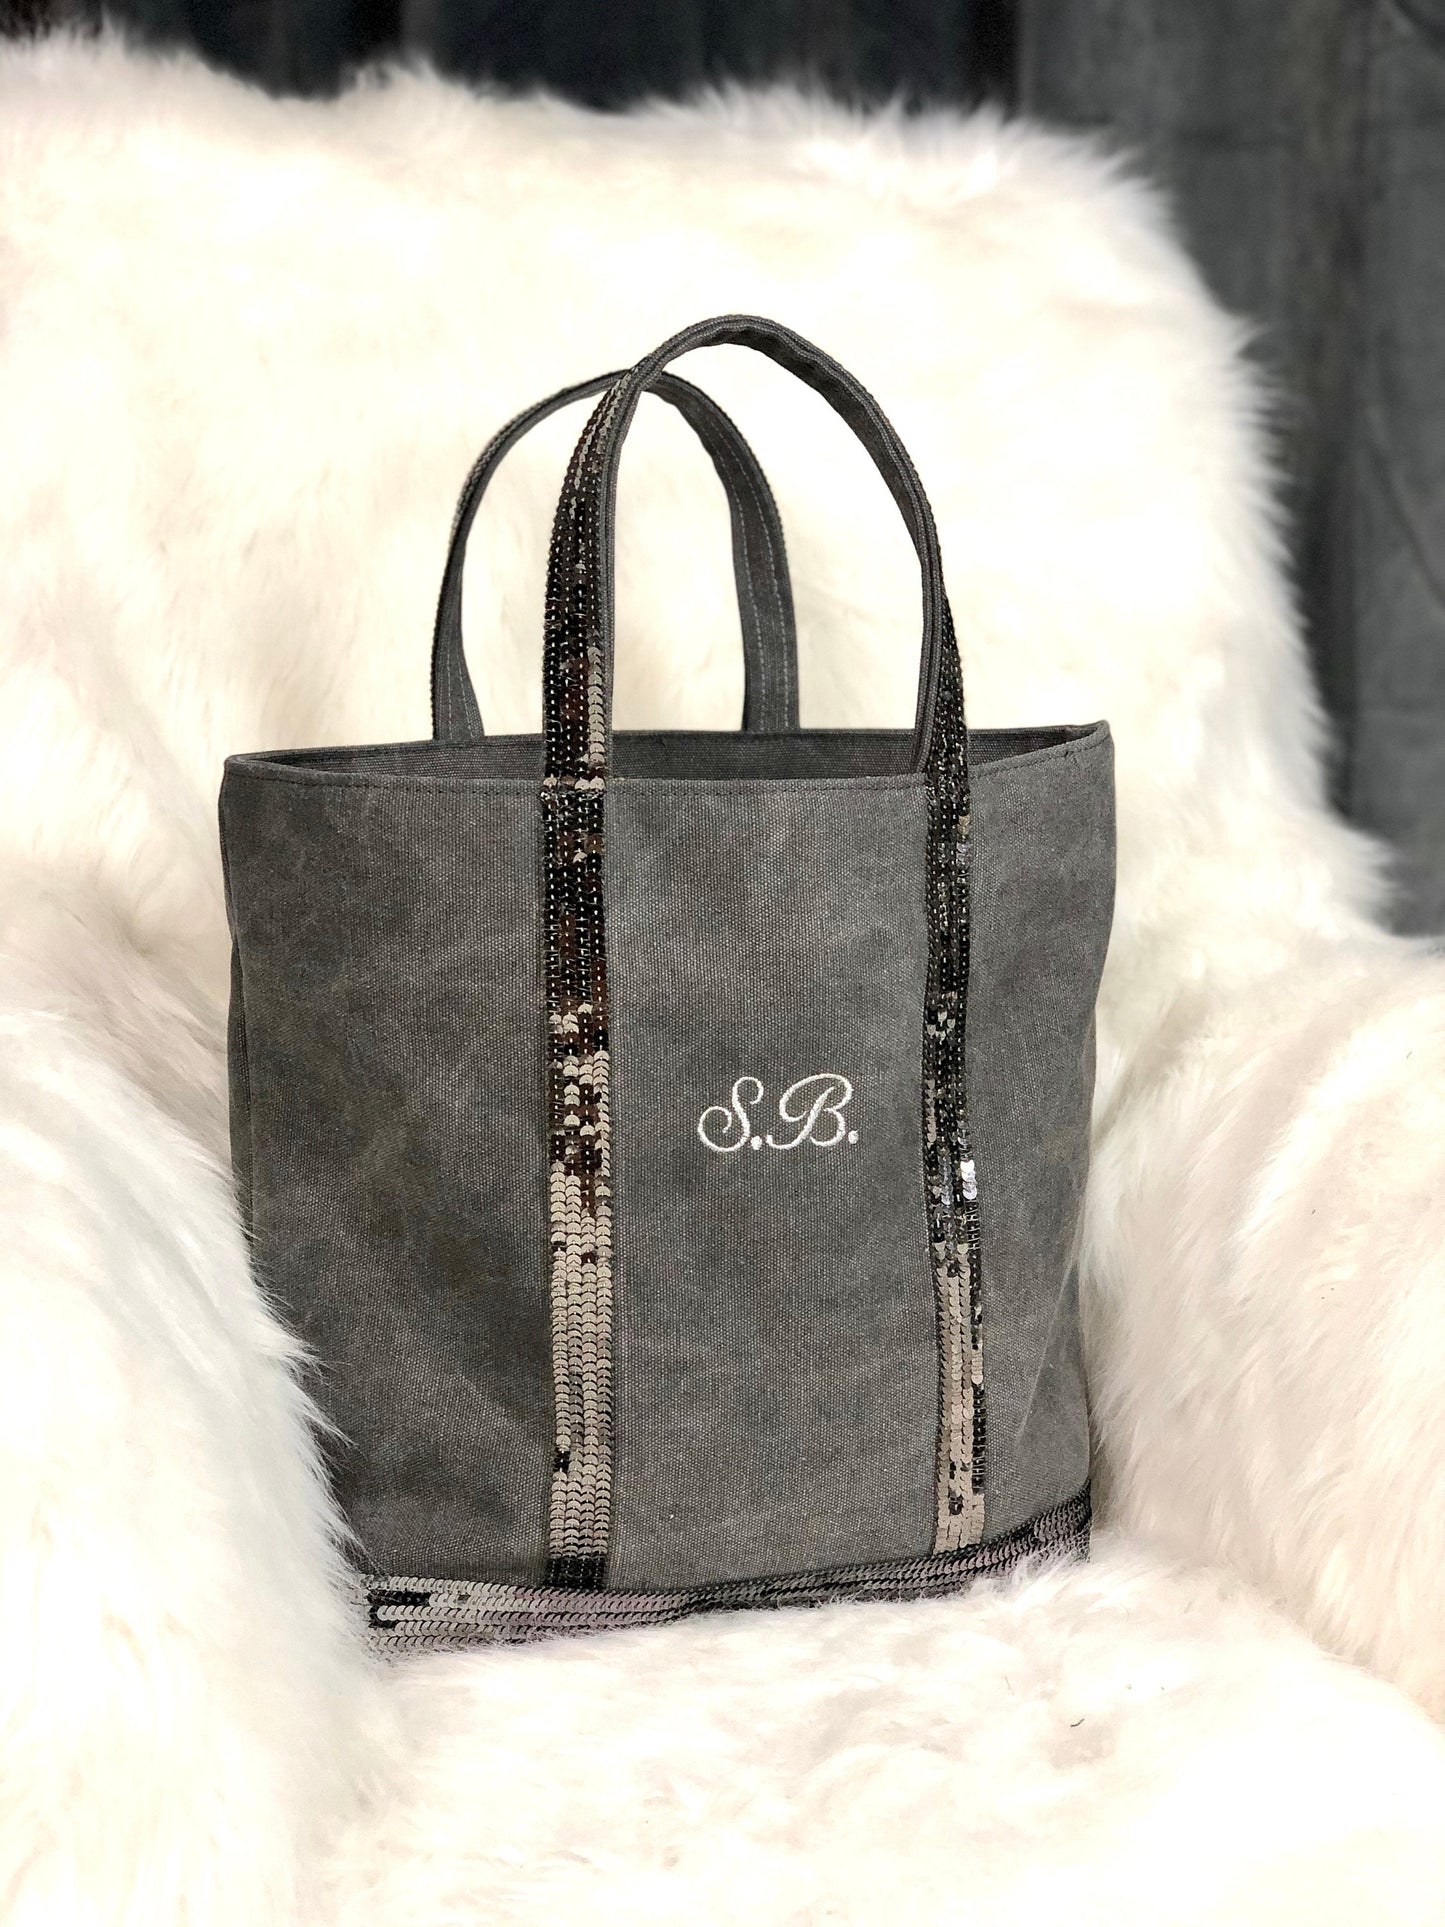 Gray tote bag with embroidered initials - corporate gift tote bag - gray tote bag with logo